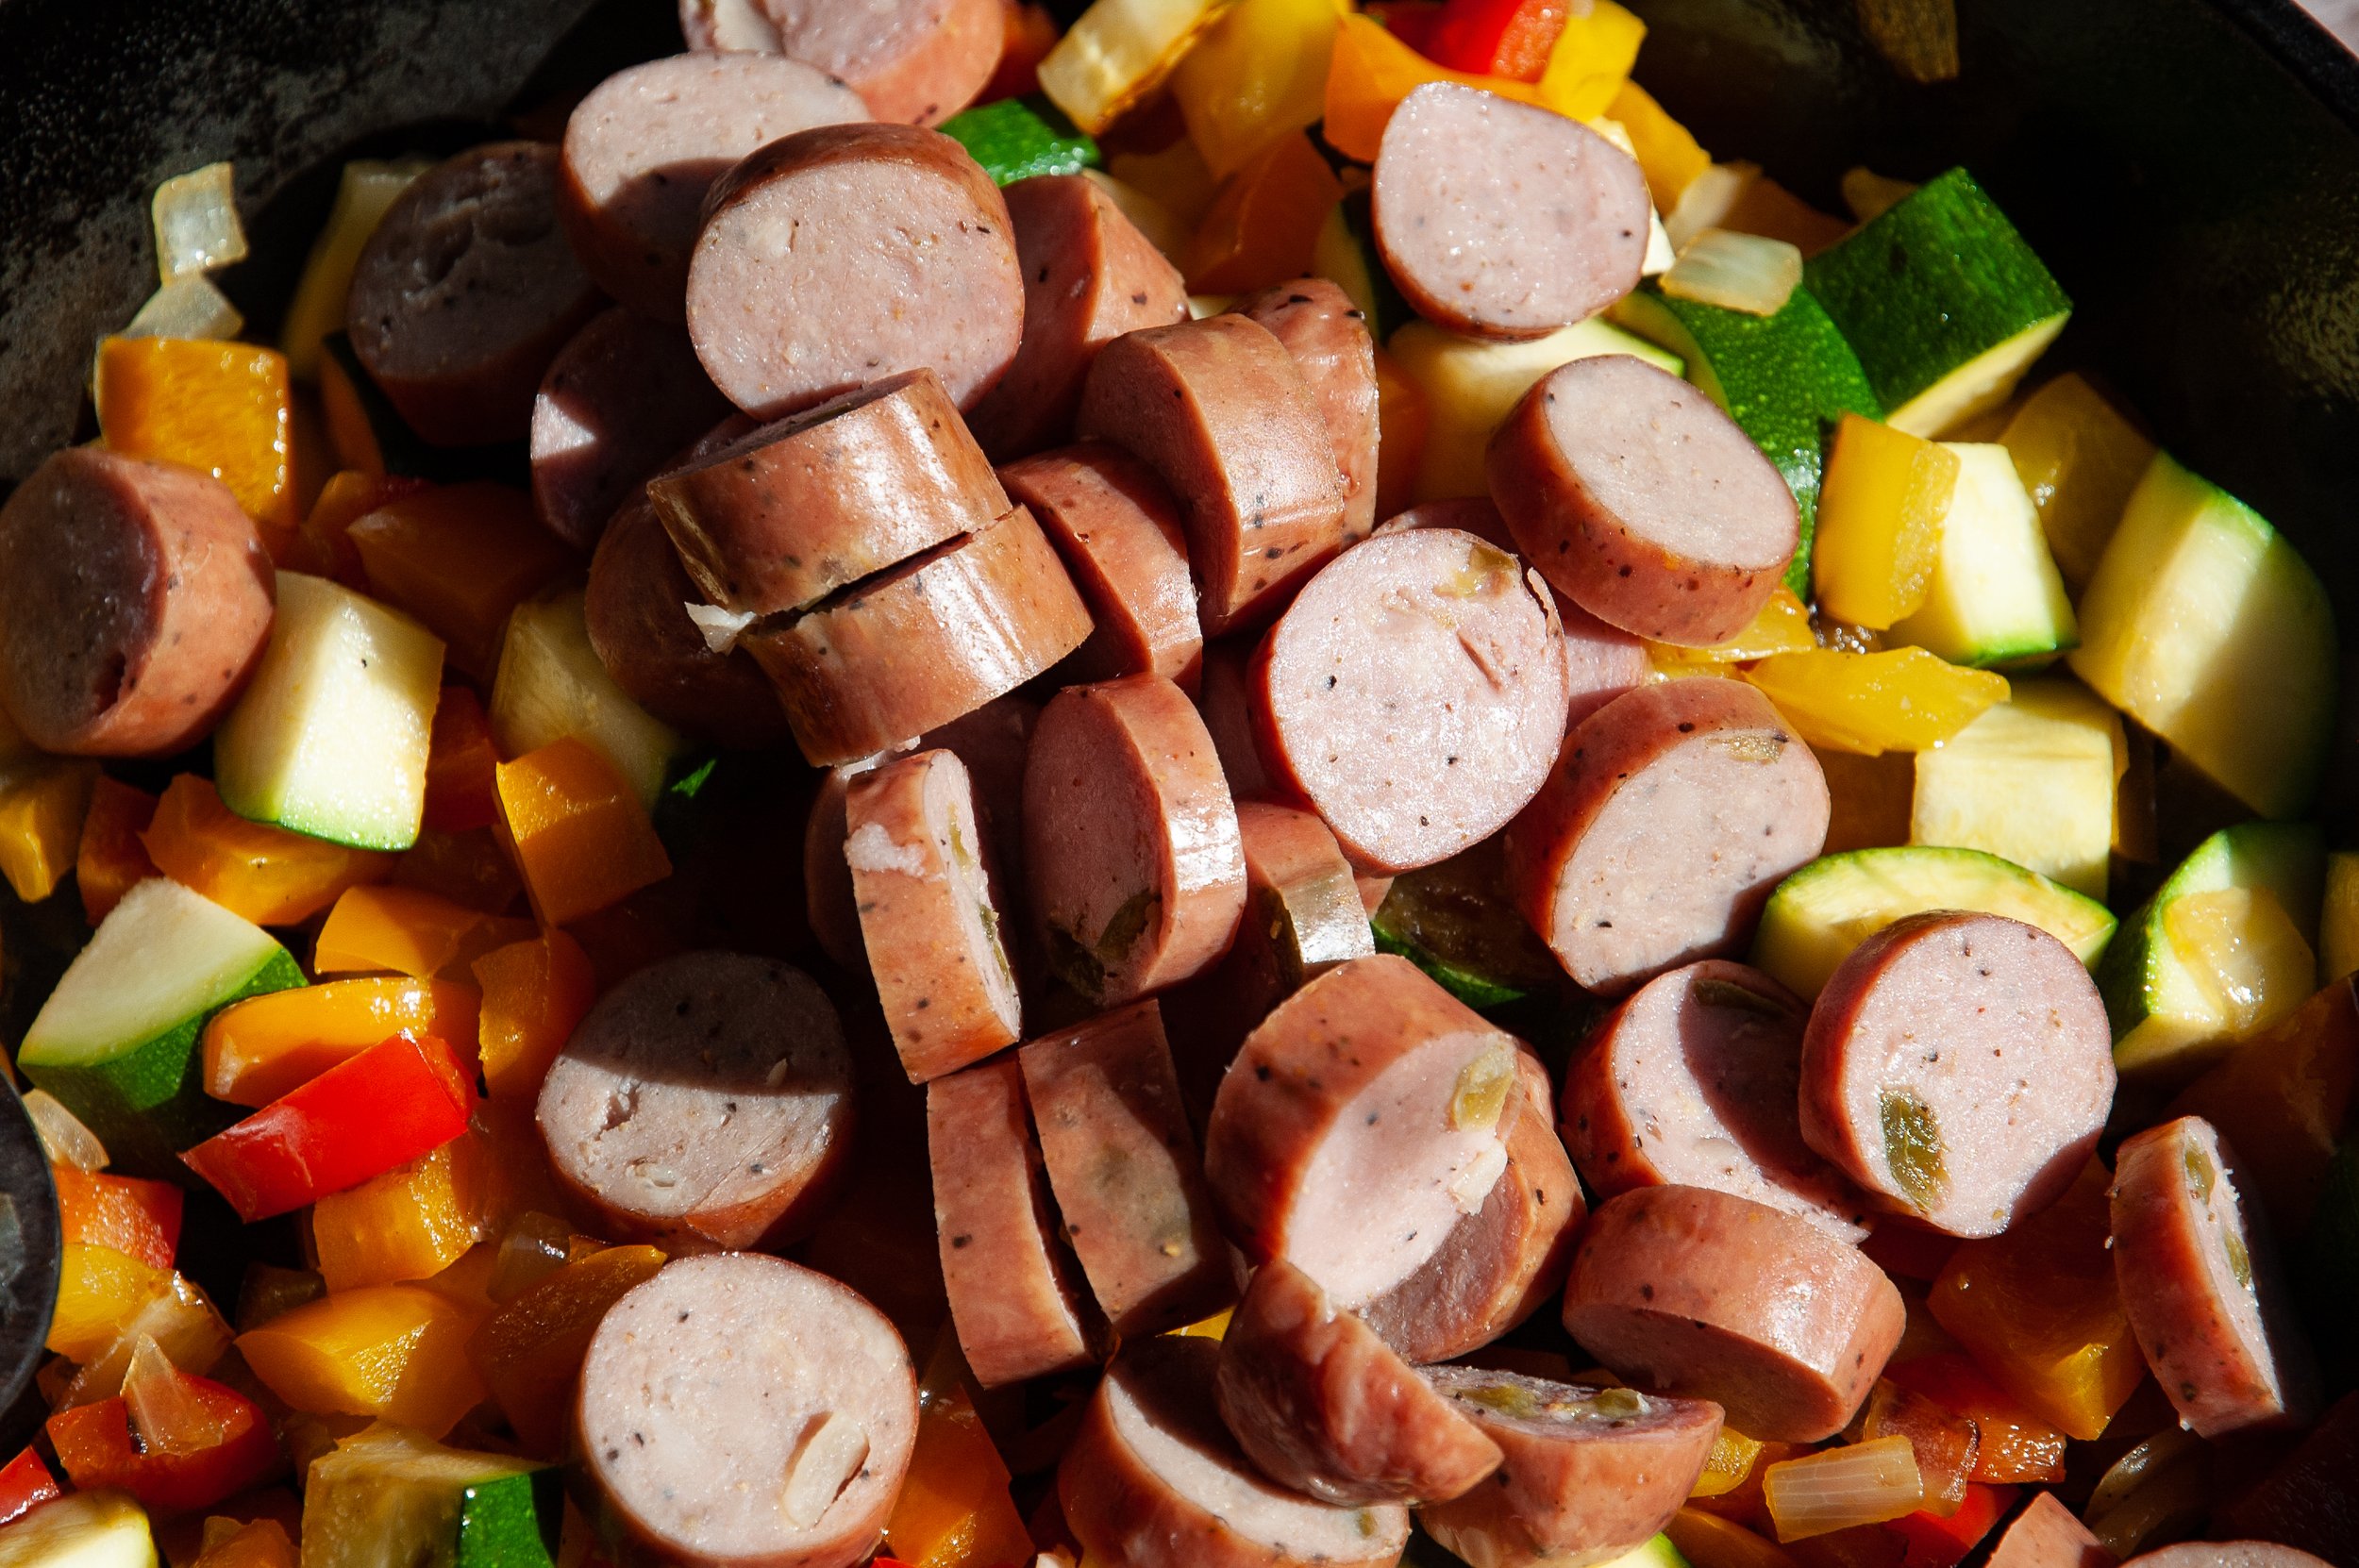 How to make a sausage and veggie skillet